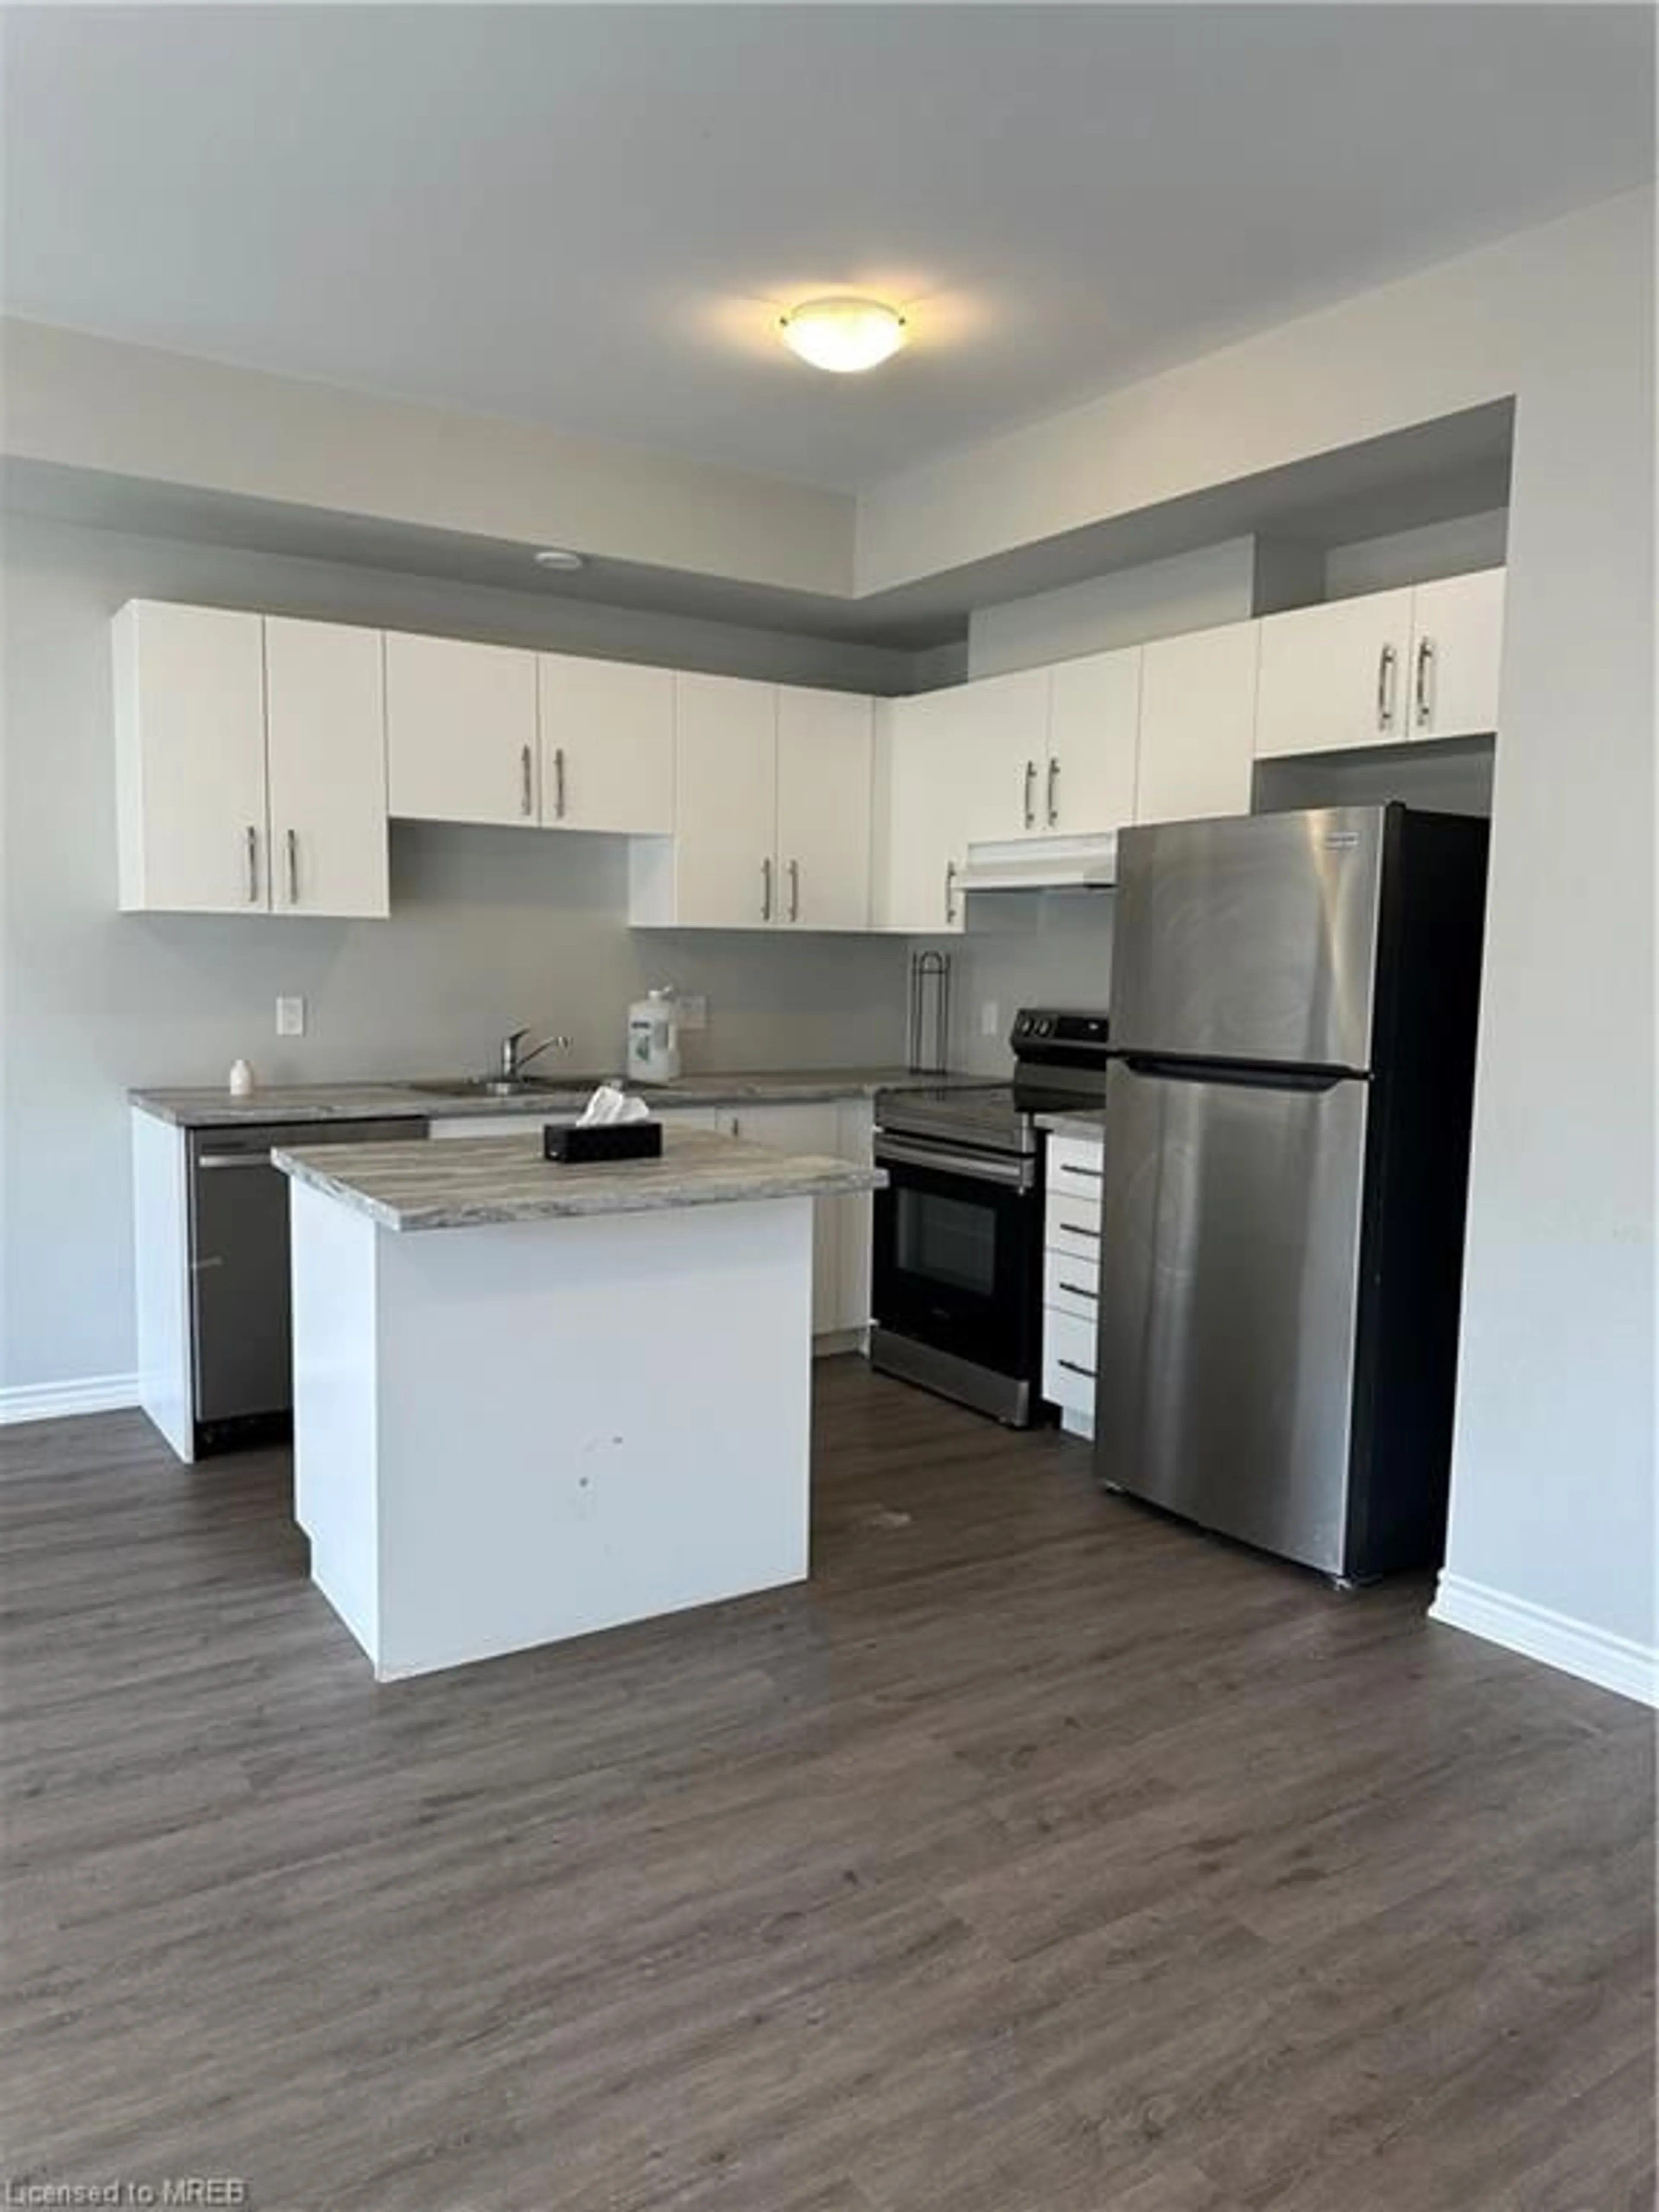 Standard kitchen for 35 Perenack Ave, Welland Ontario L3C 2C6